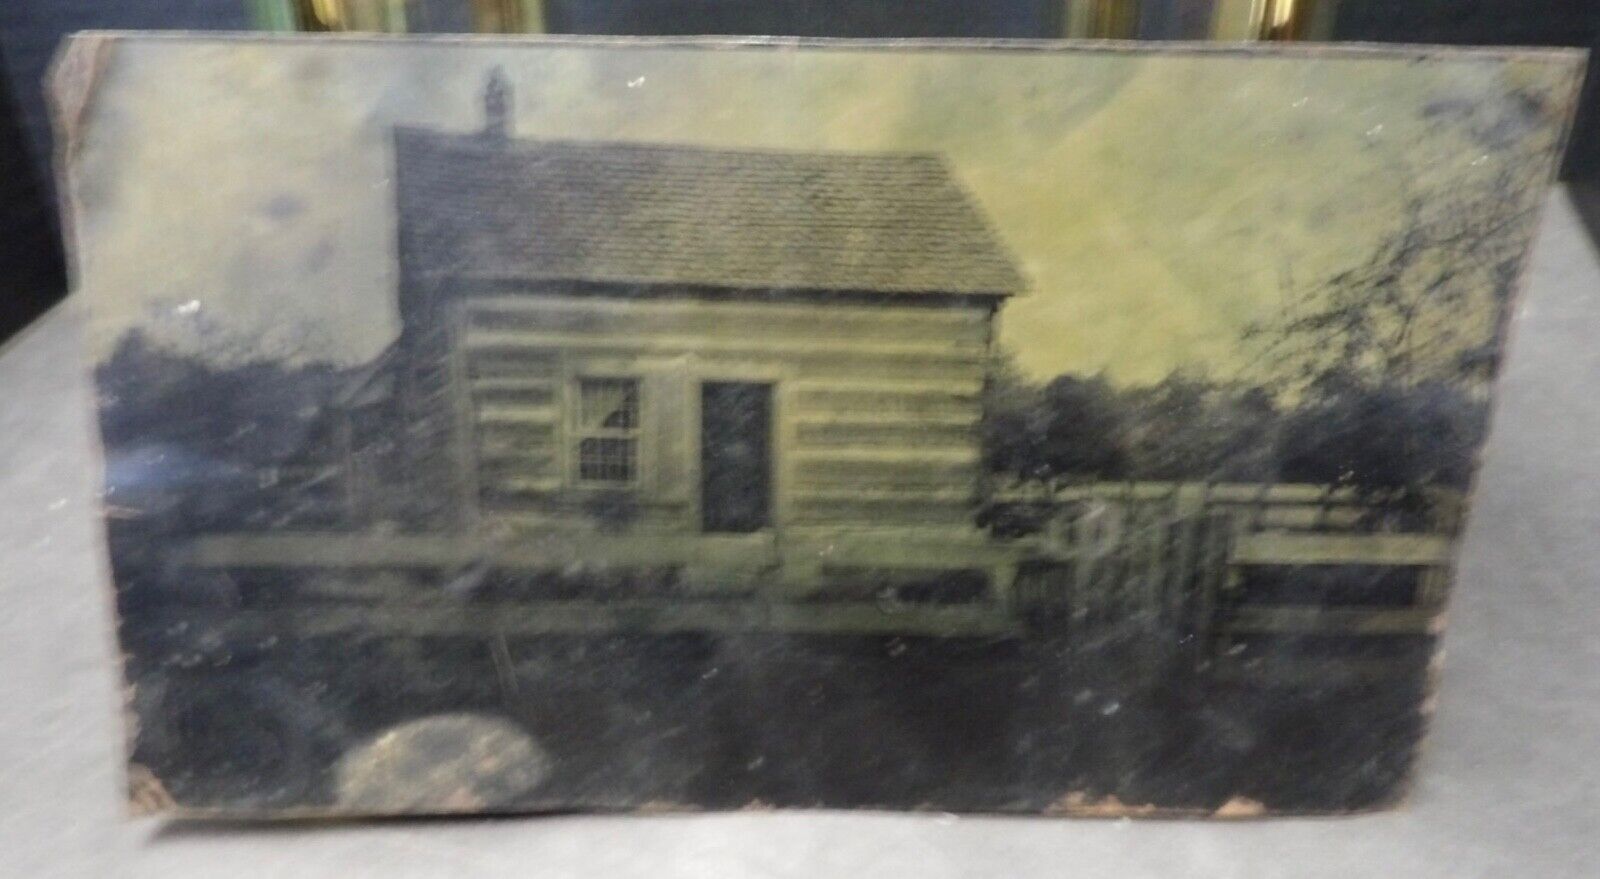 Early Full Plate FerroType of Log Cabin - 1860s or 1870s Era.  Lincoln\'s Home?